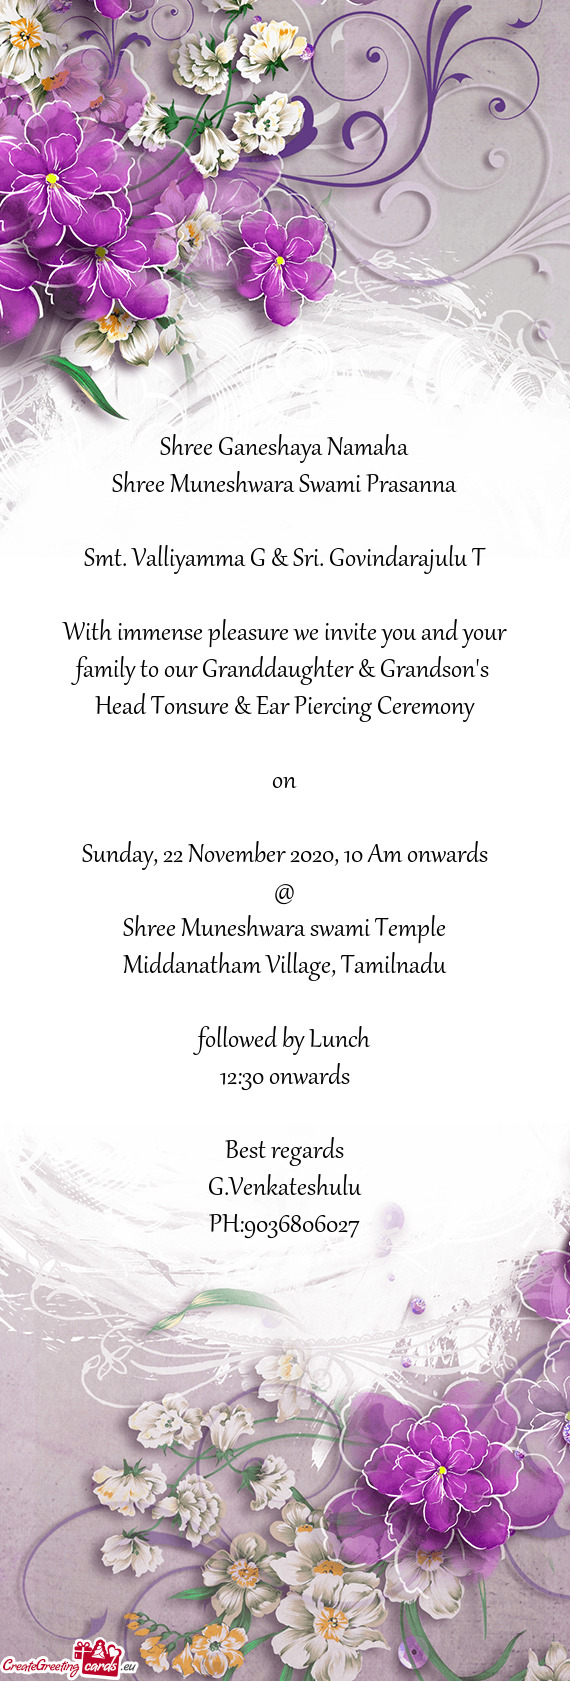 With immense pleasure we invite you and your family to our Granddaughter & Grandson's